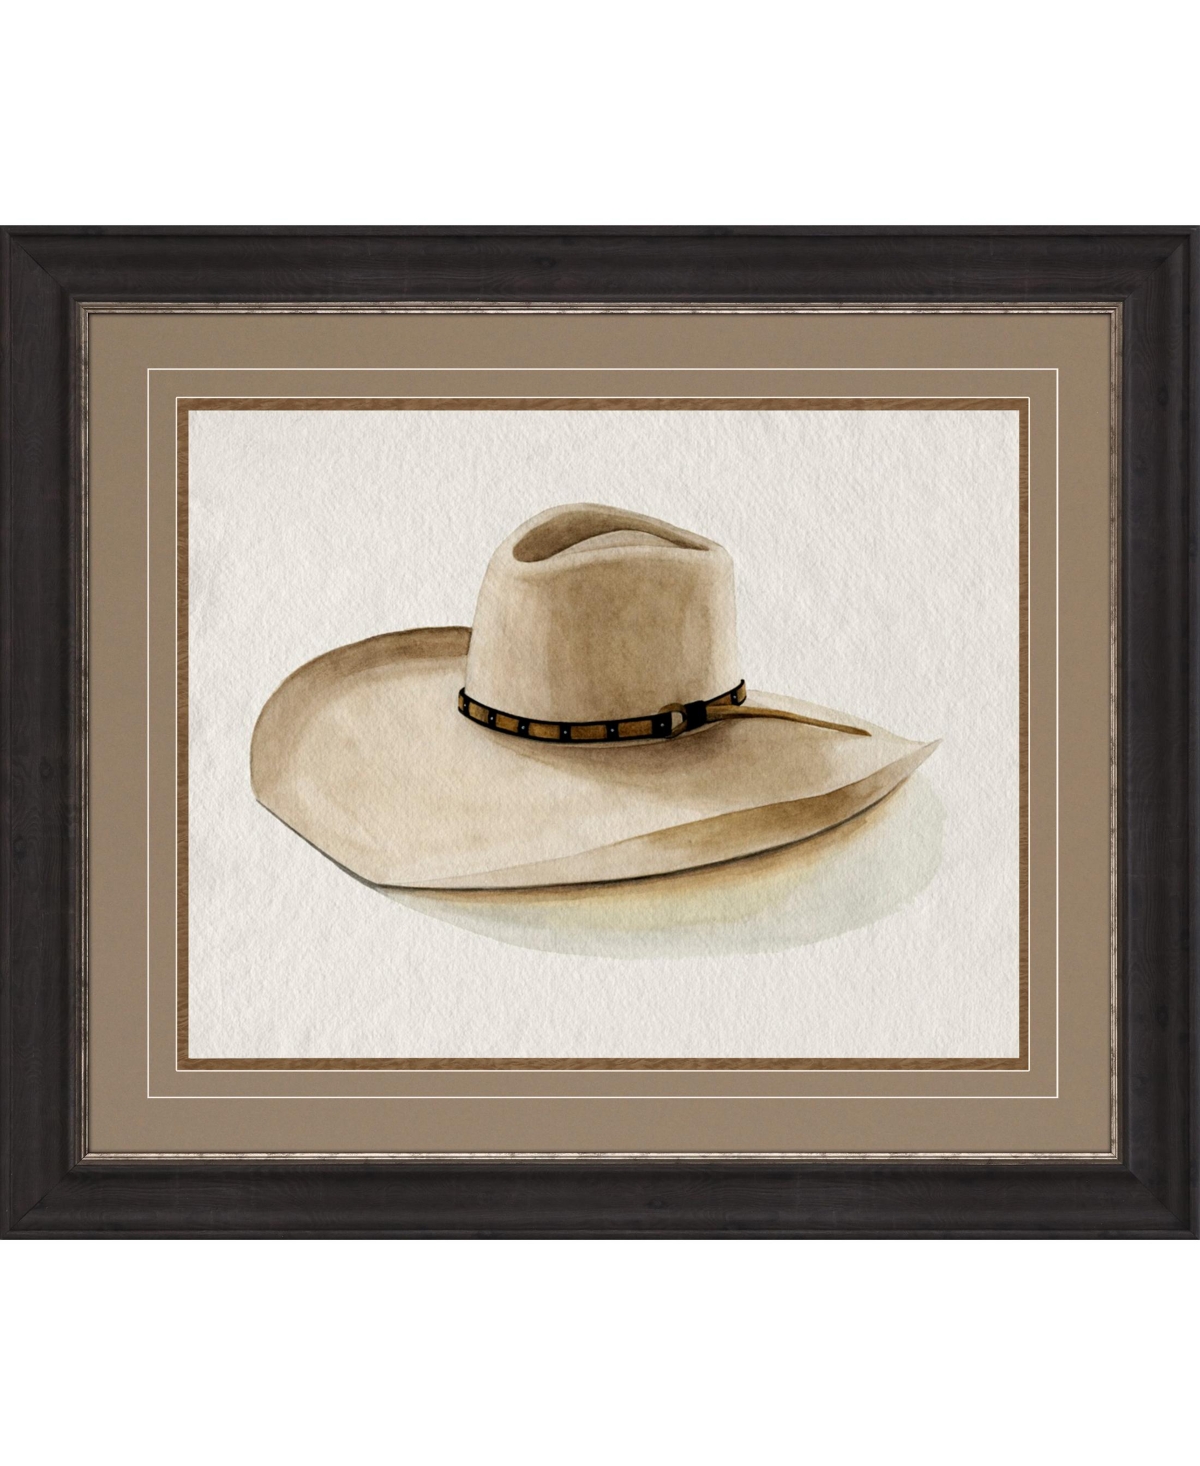 Paragon Picture Gallery Cowboy Hat I Framed Art In Beige